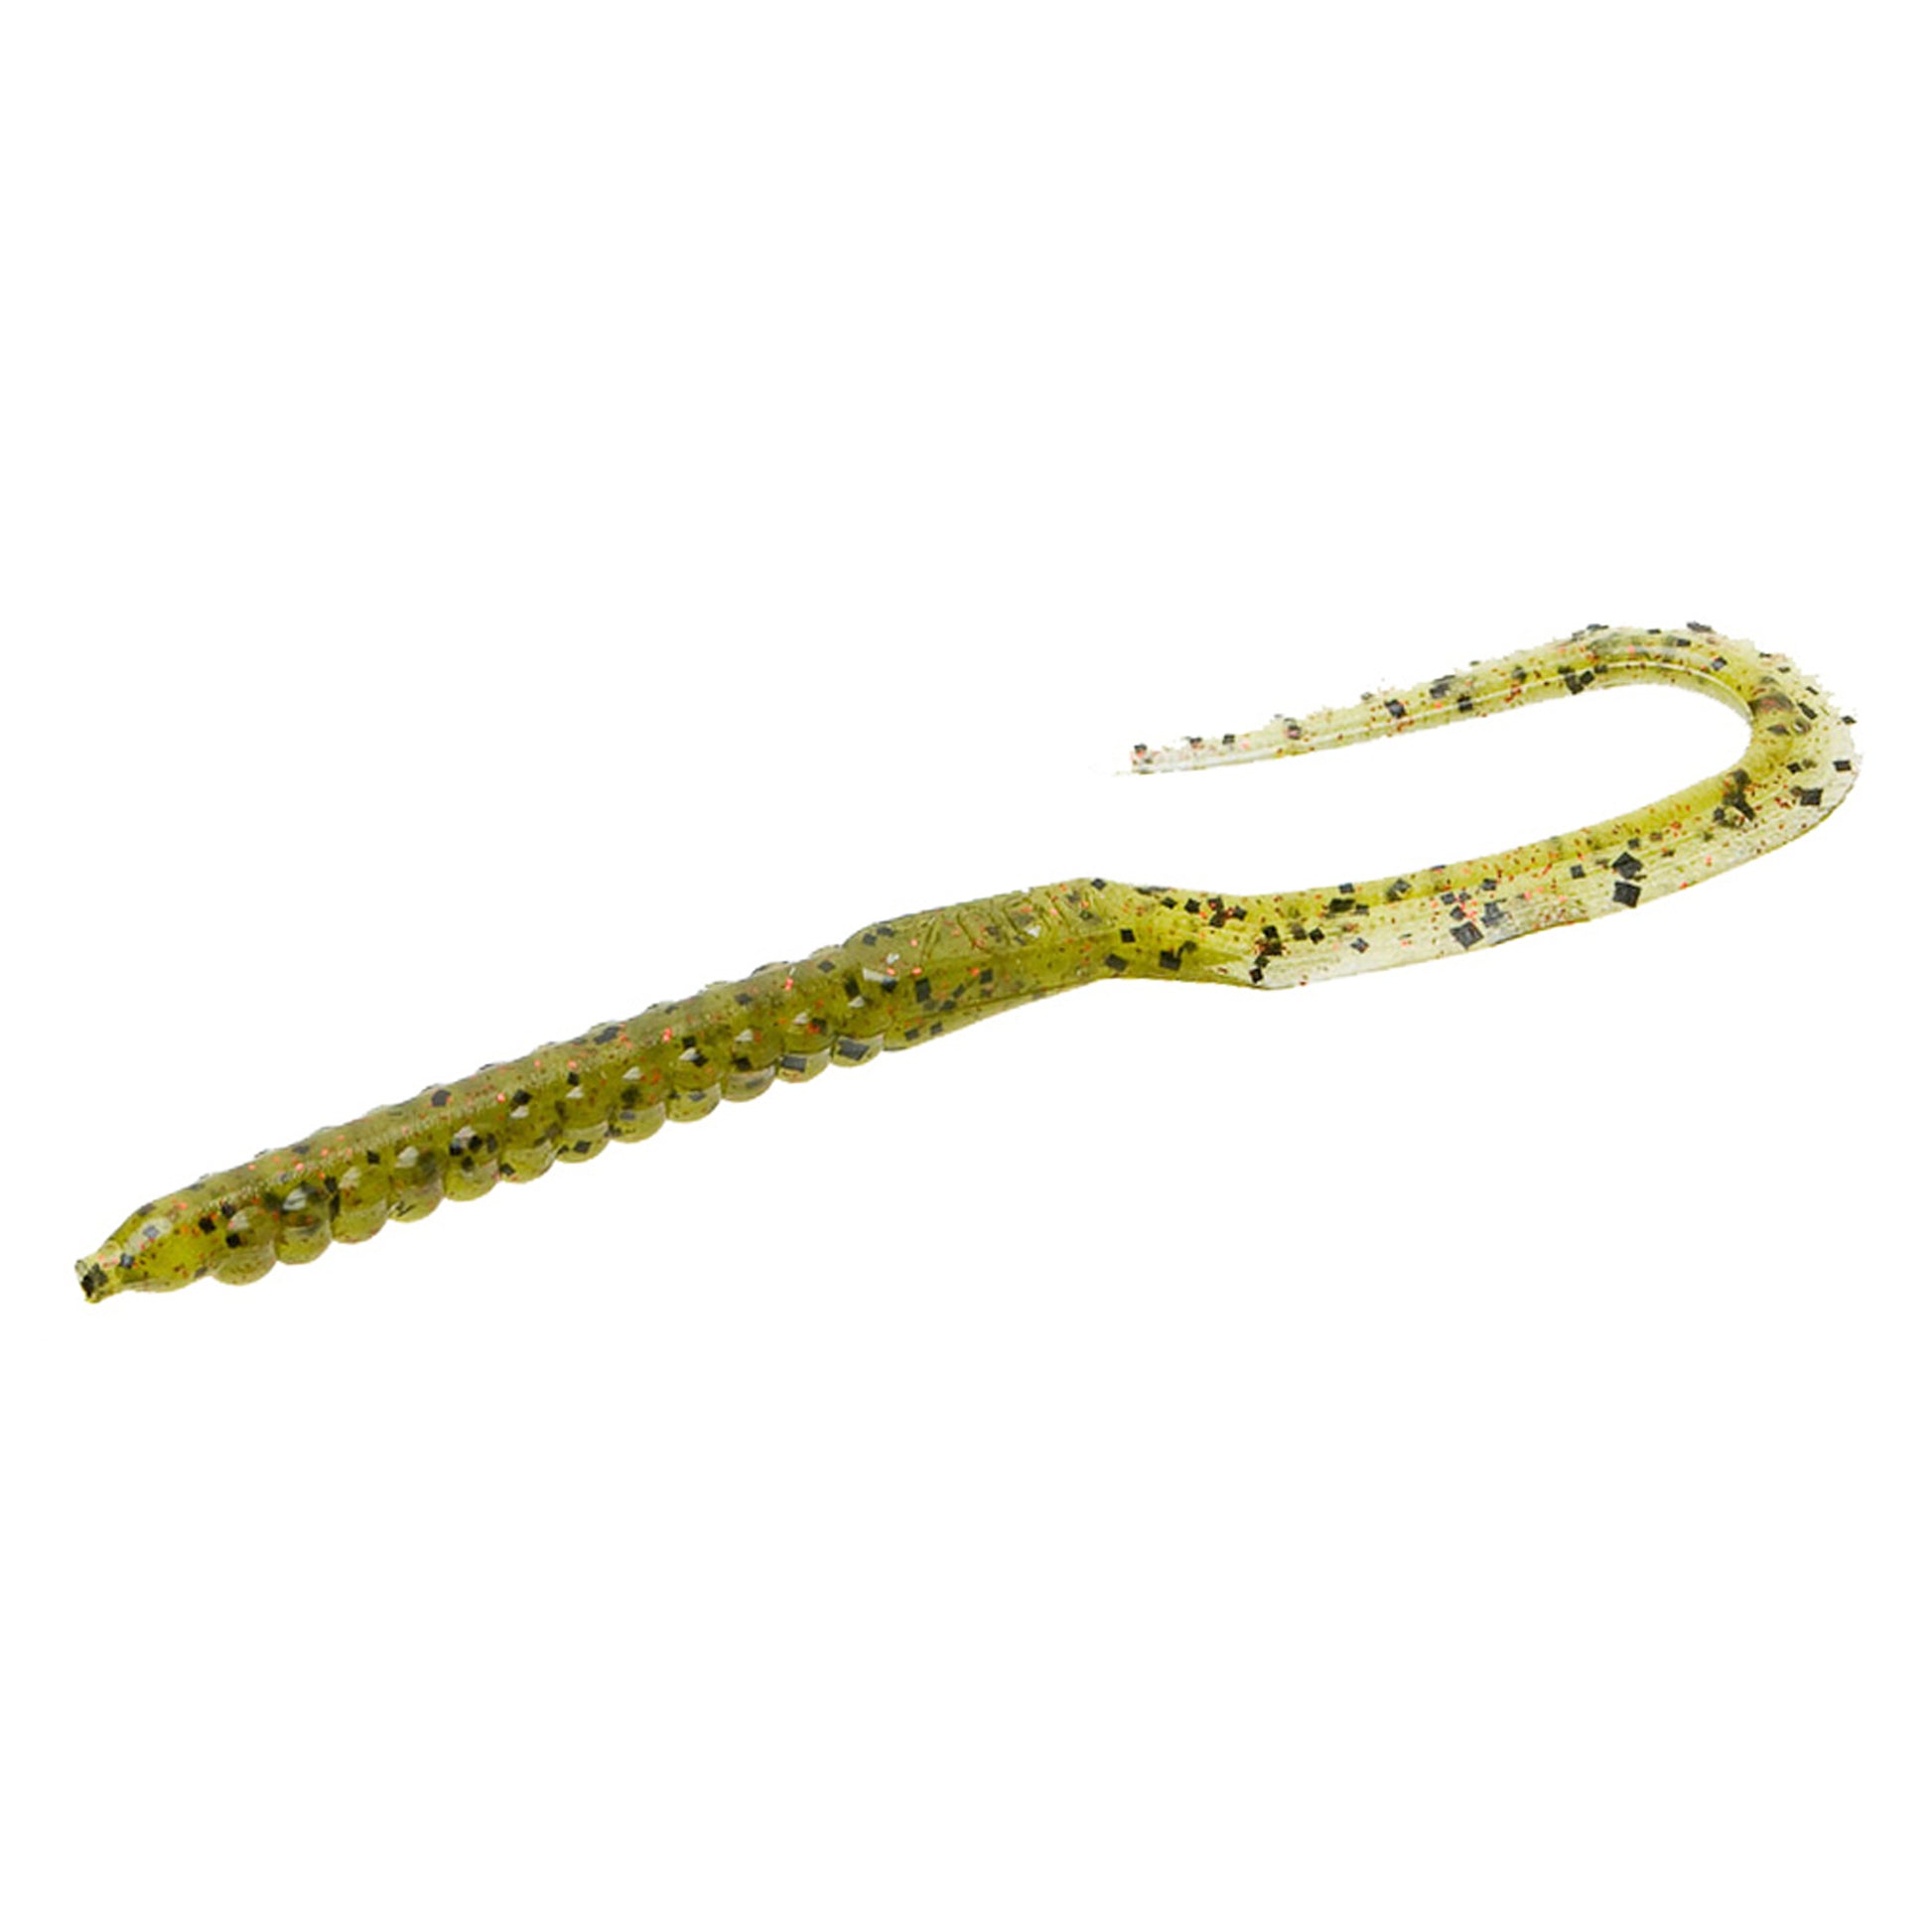 Zoom U-Tale 6'' – Lures and Lead